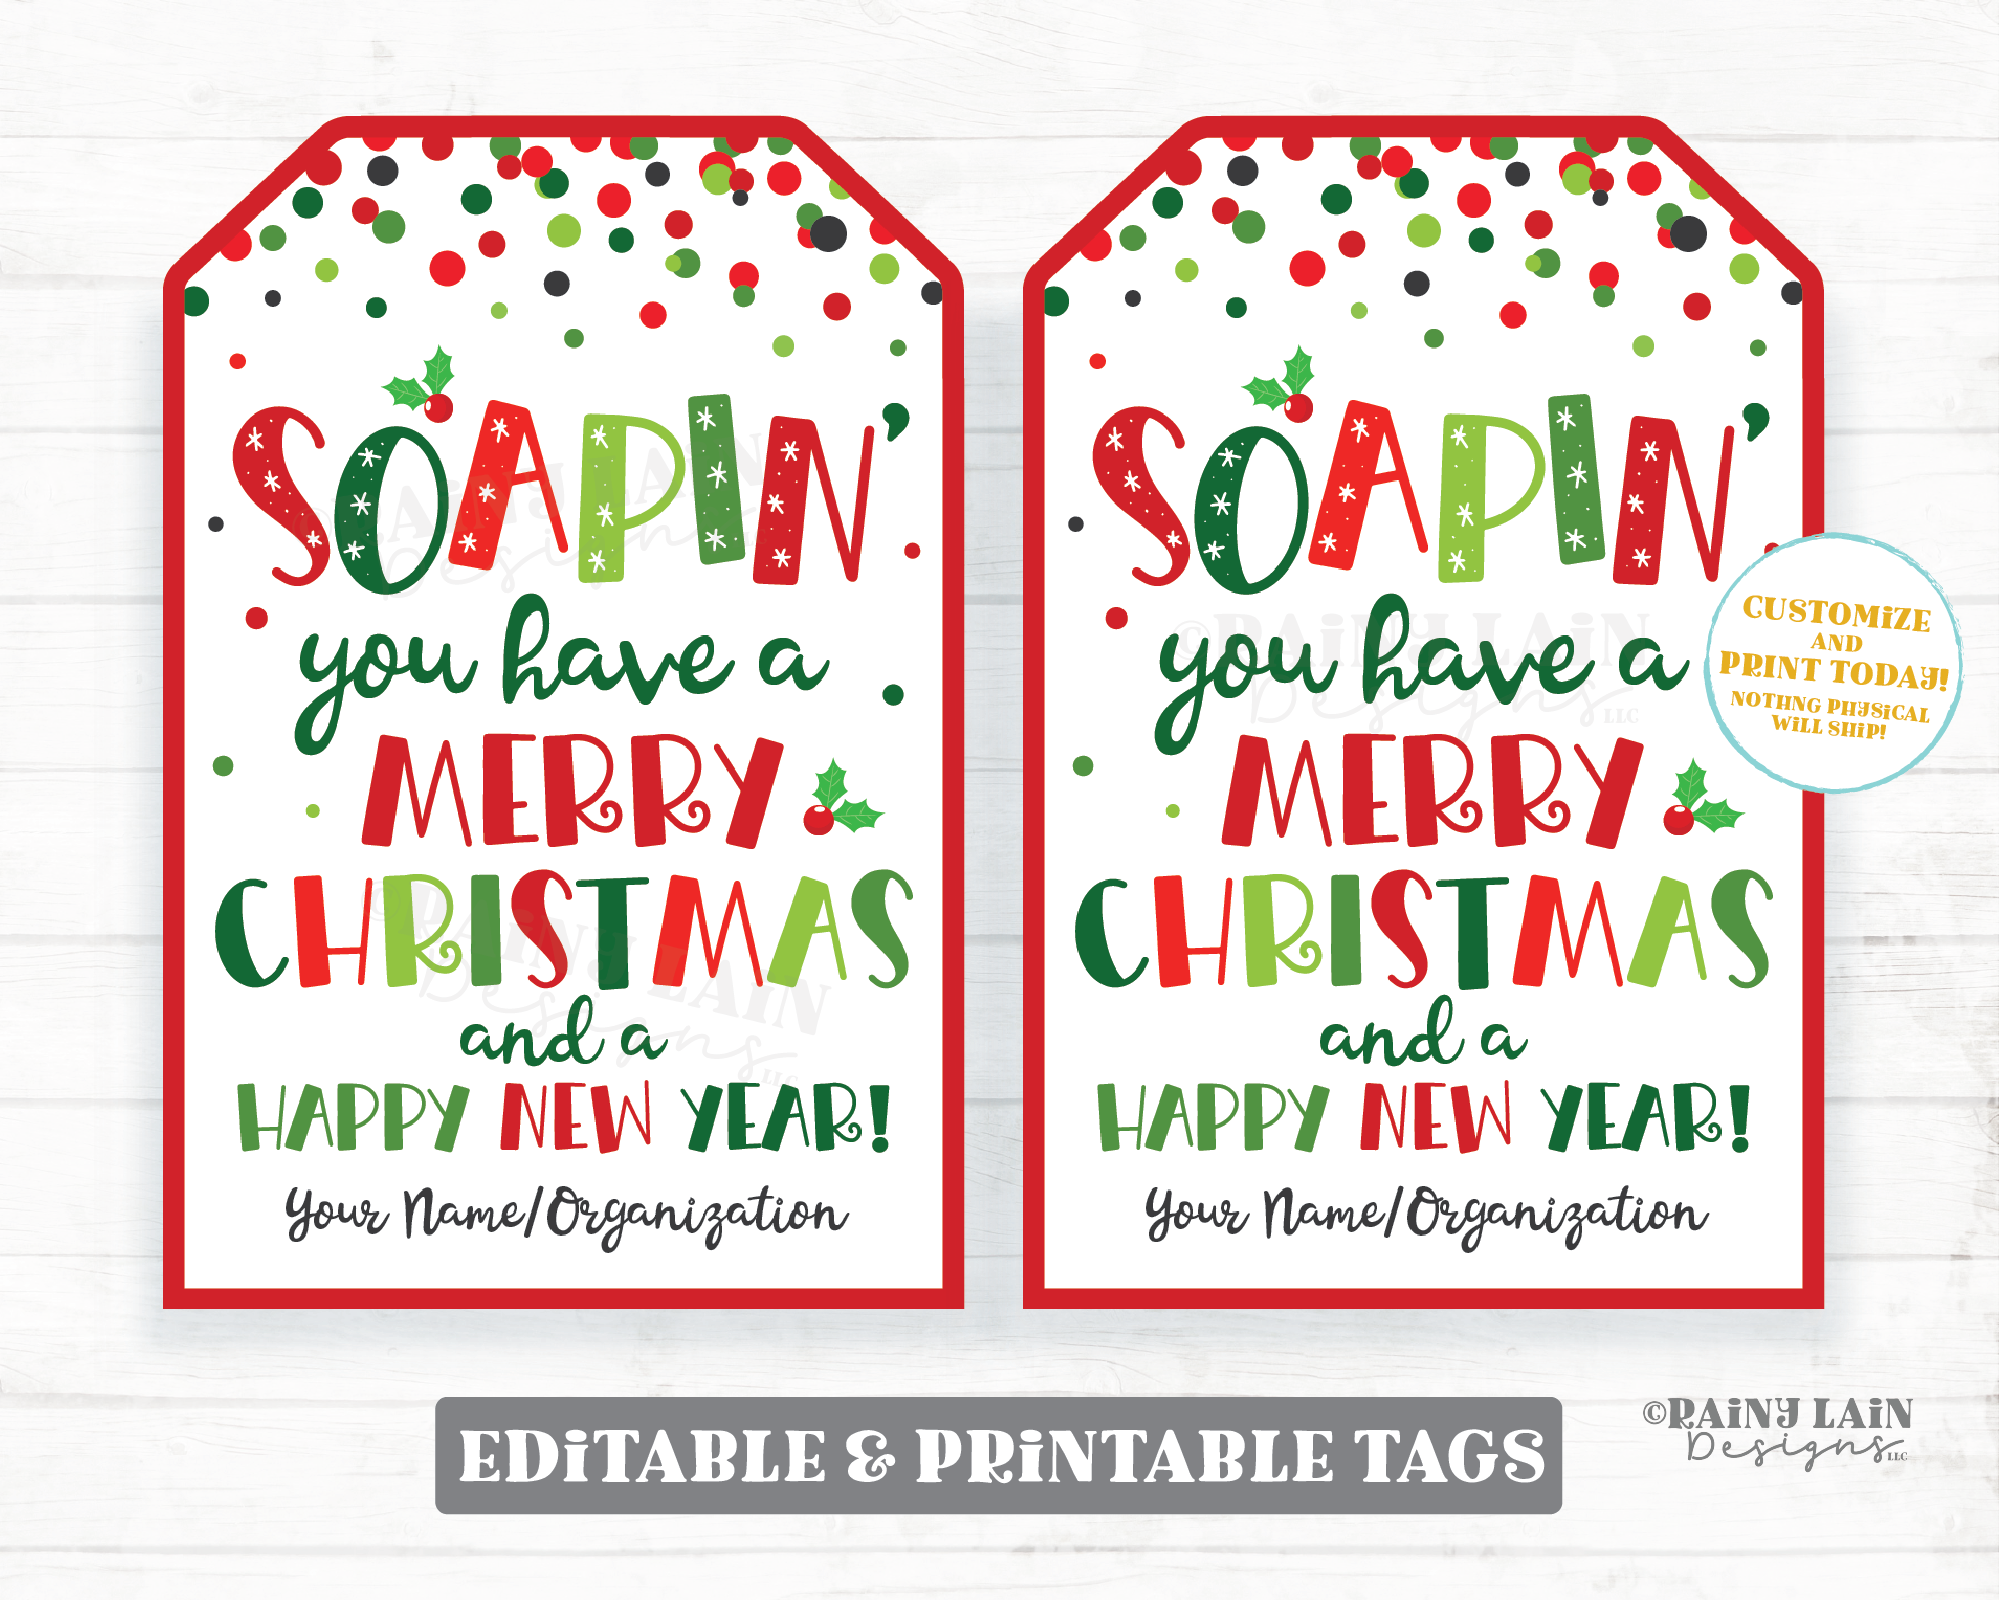 soapin-you-have-a-merry-christmas-tags-holiday-soap-gift-appreciation-rainy-lain-designs-llc